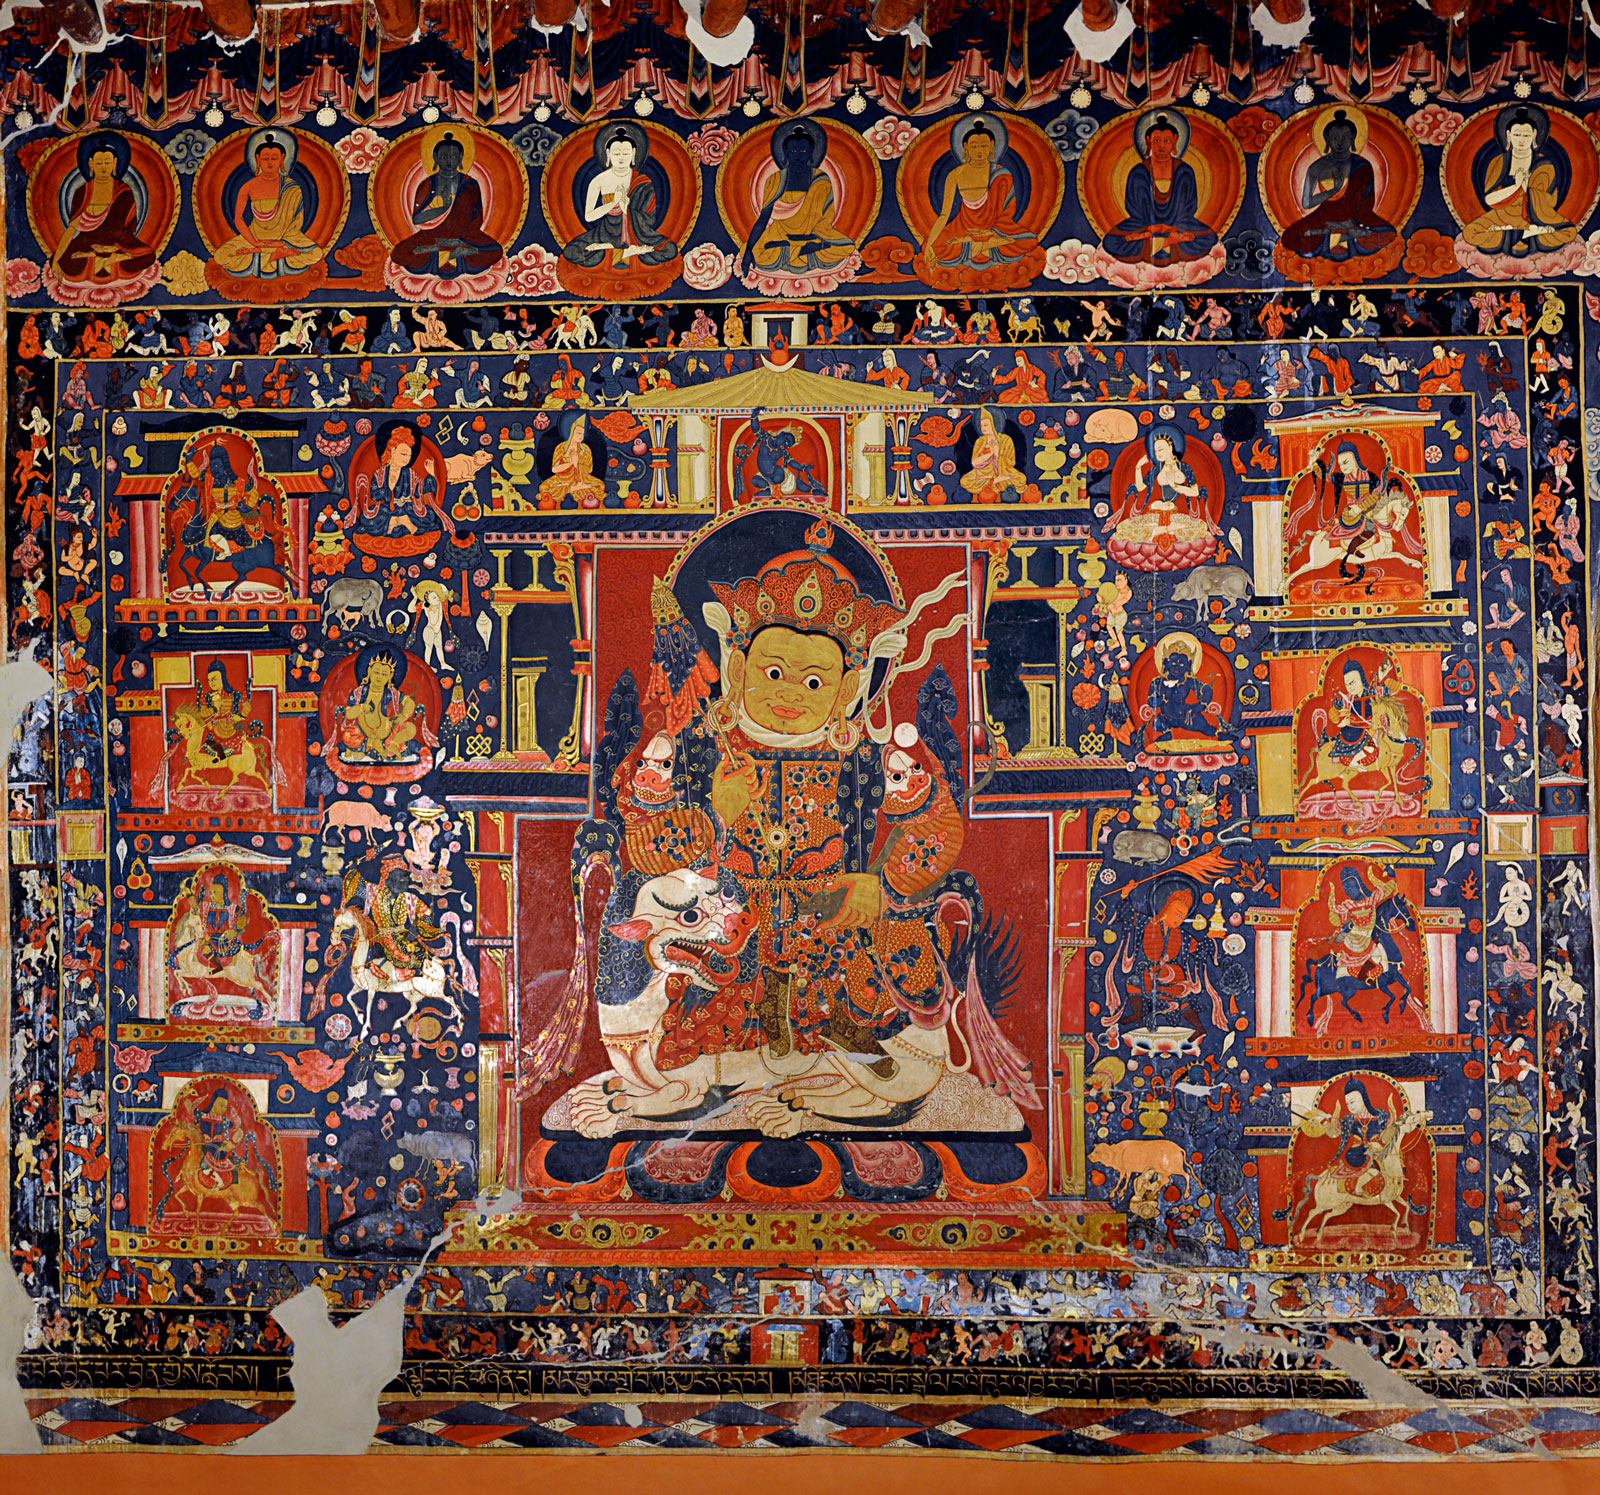 Painting of Vaishravana, Lord of the Yakshas, and the Realm of Plenty, in the White Temple of the Ornamented World, Tholing, fifteenth century